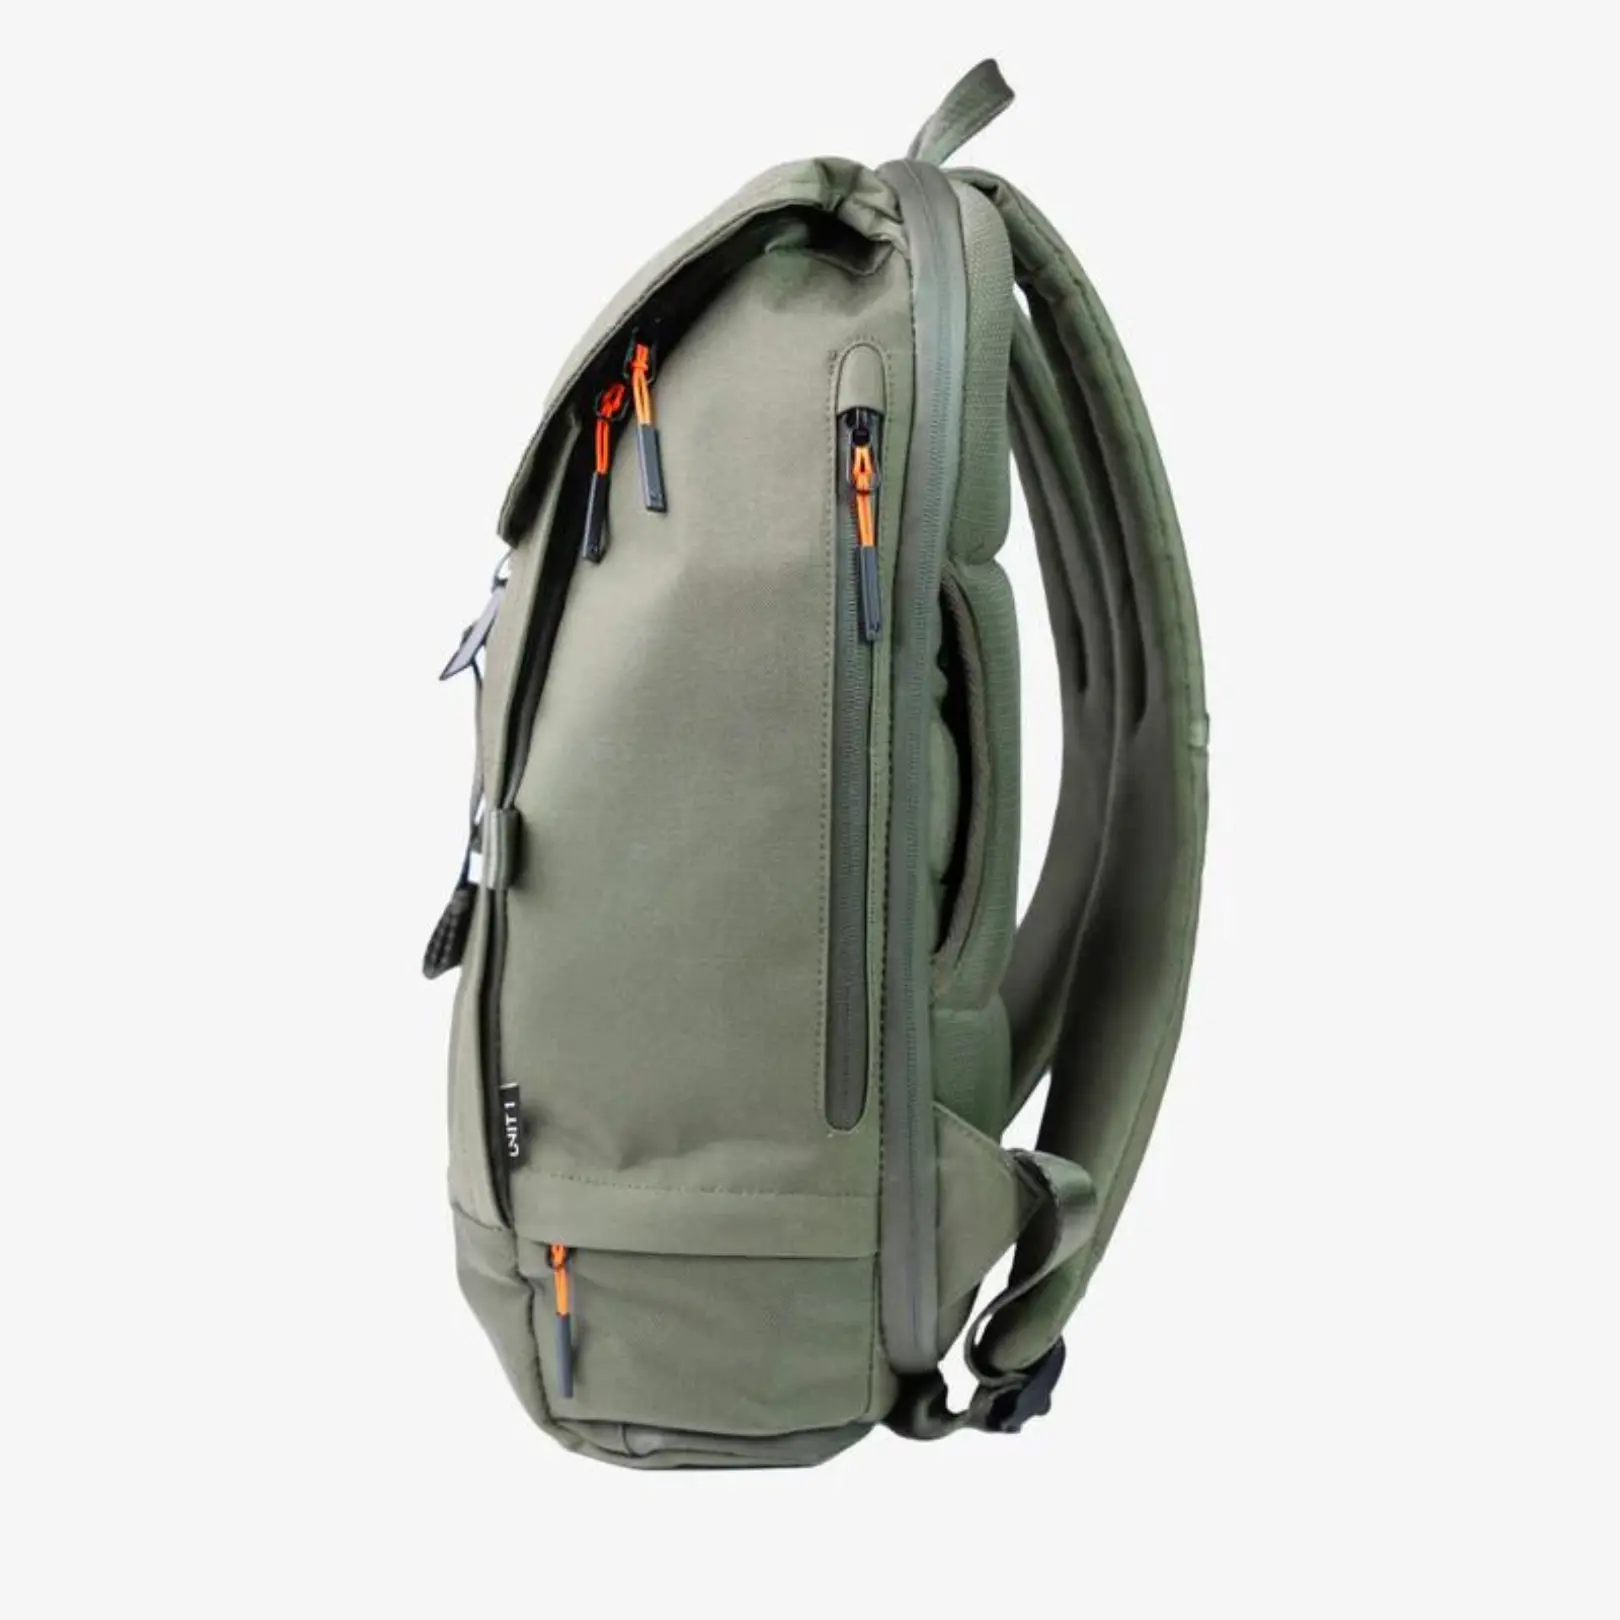 UNIT 1 Torch backpack Cactus Green